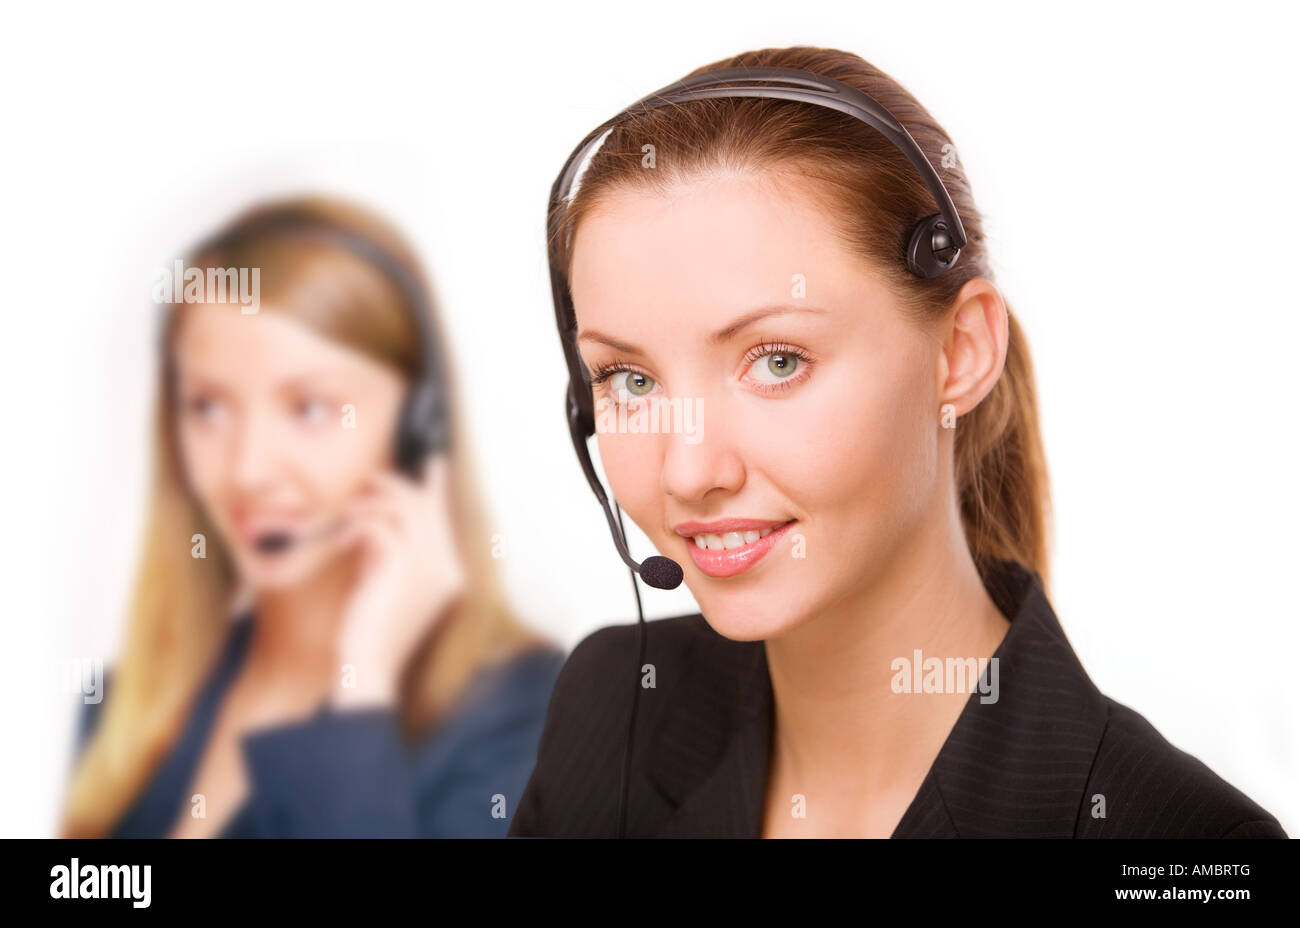 a girl is a phone operator Stock Photo